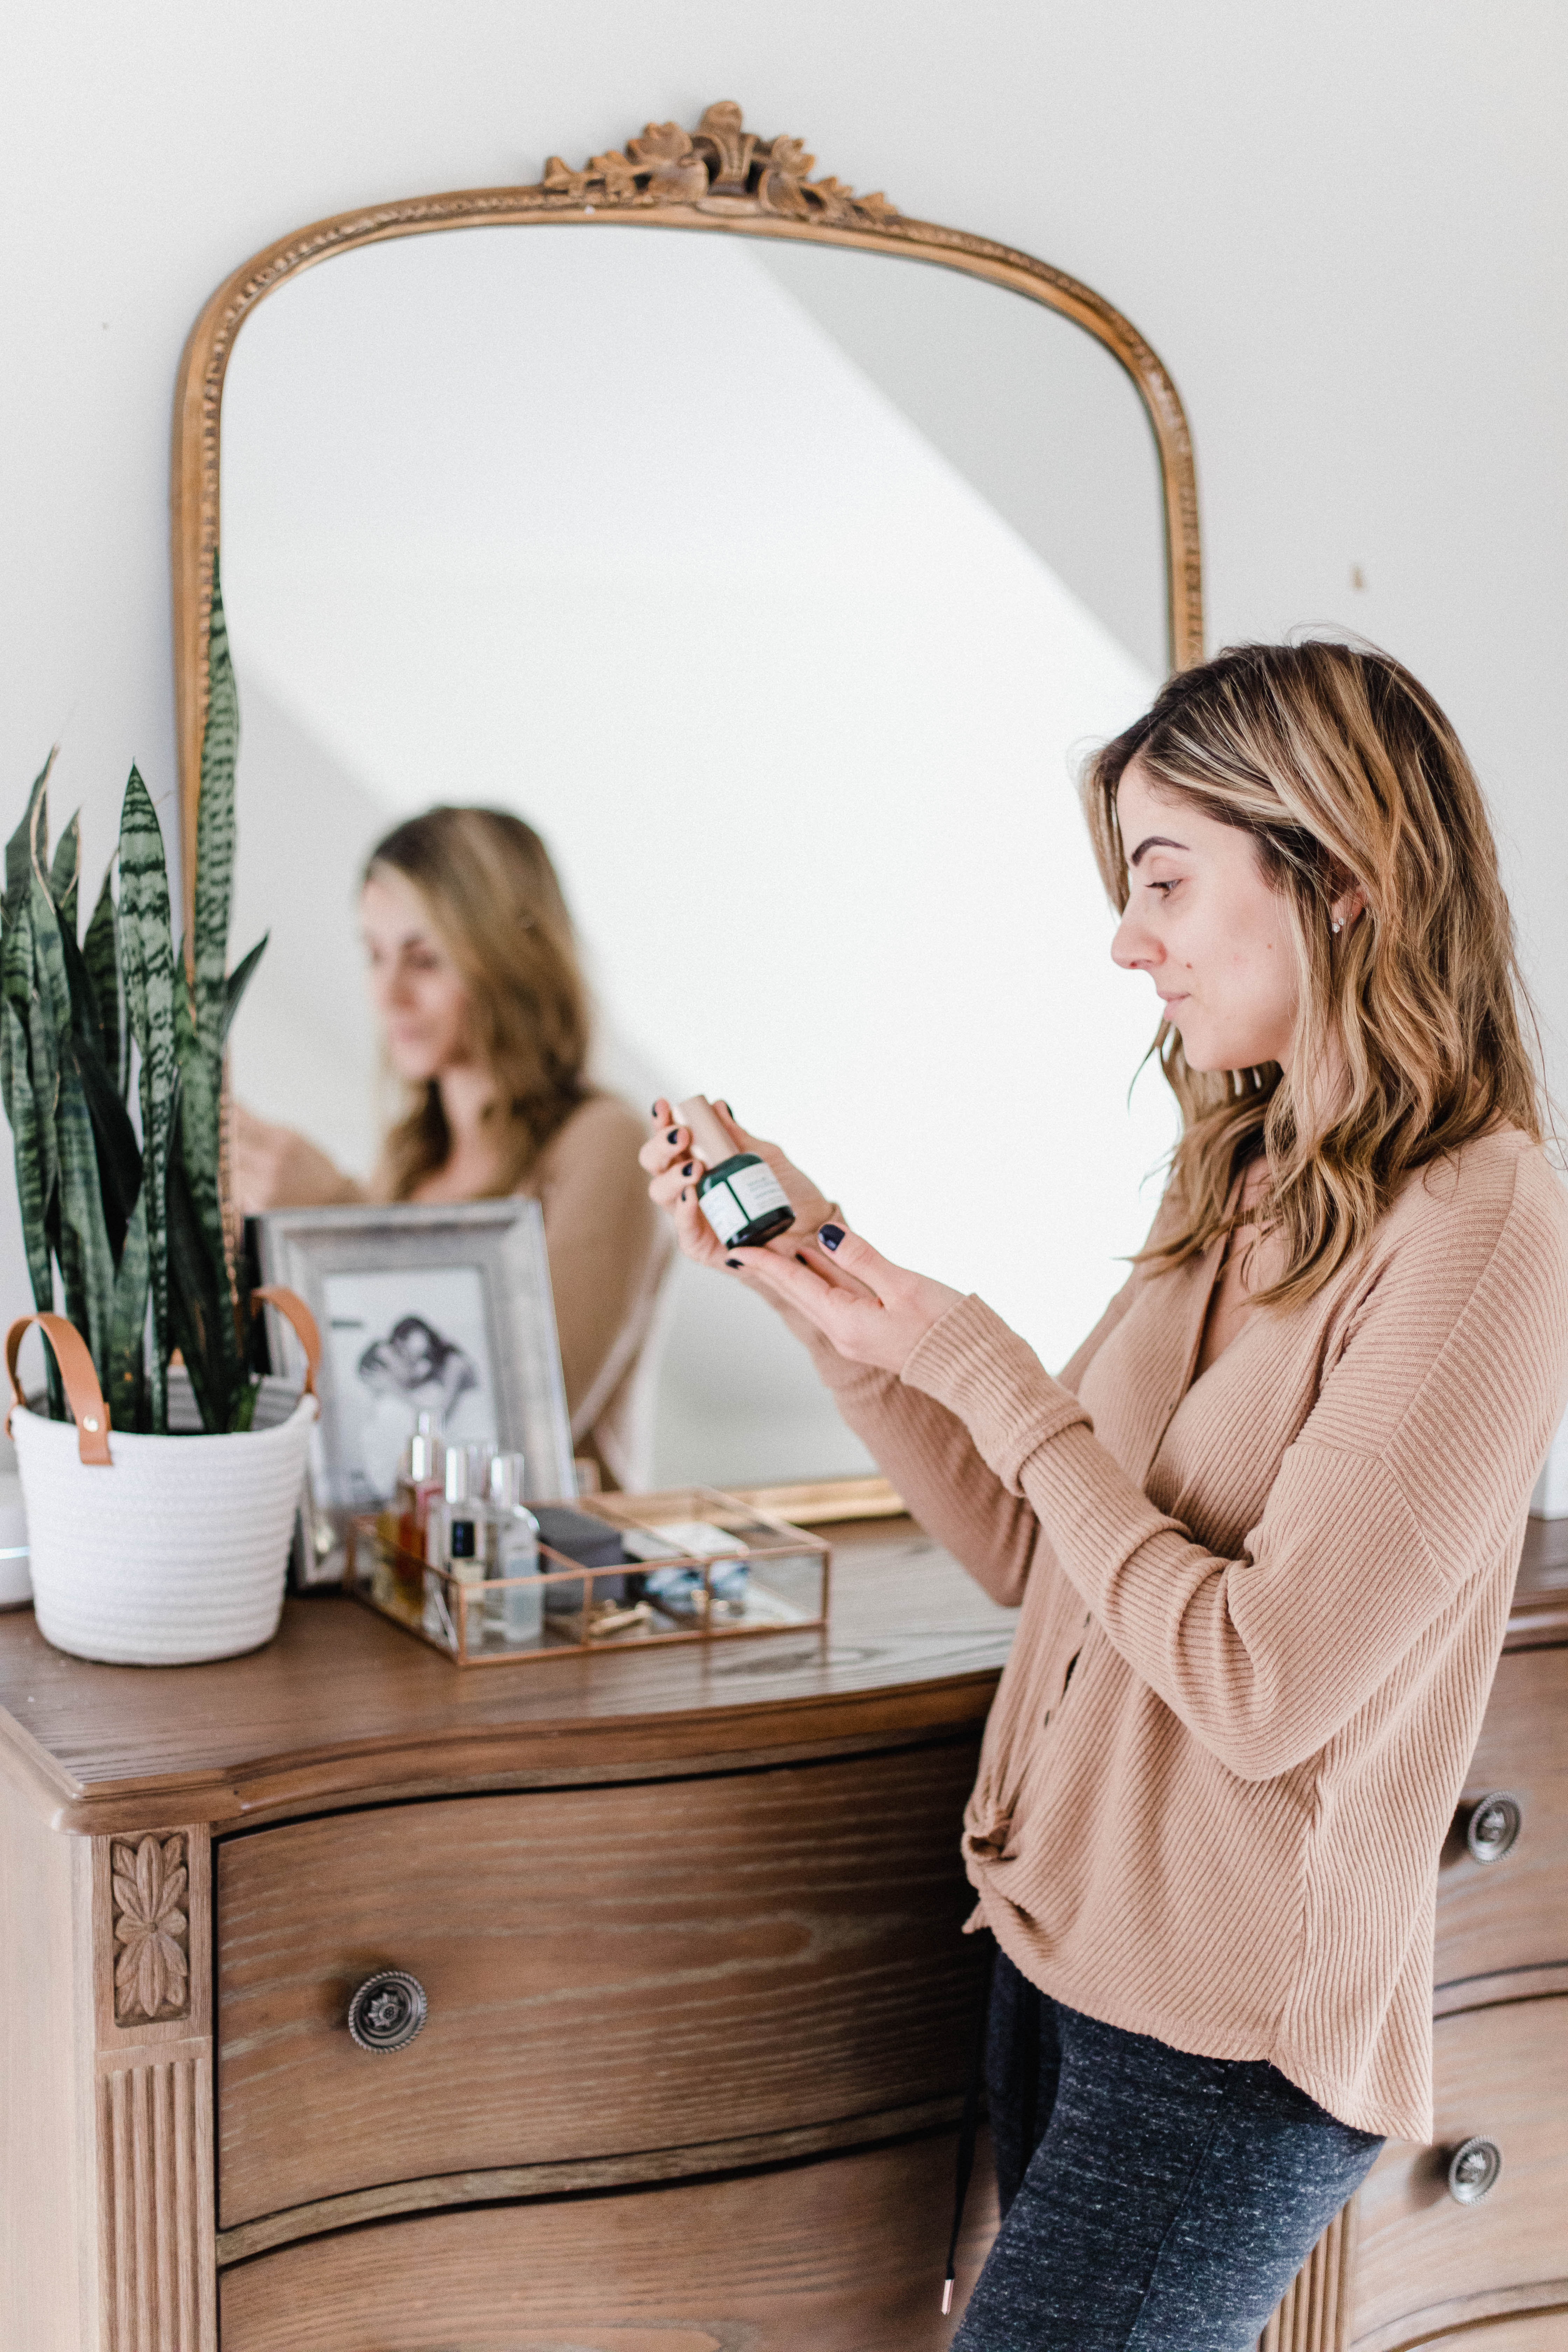 Connecticut life and style blogger Lauren McBride shares her current favorite @Biossance products, including a flash sale for Black Friday #ad